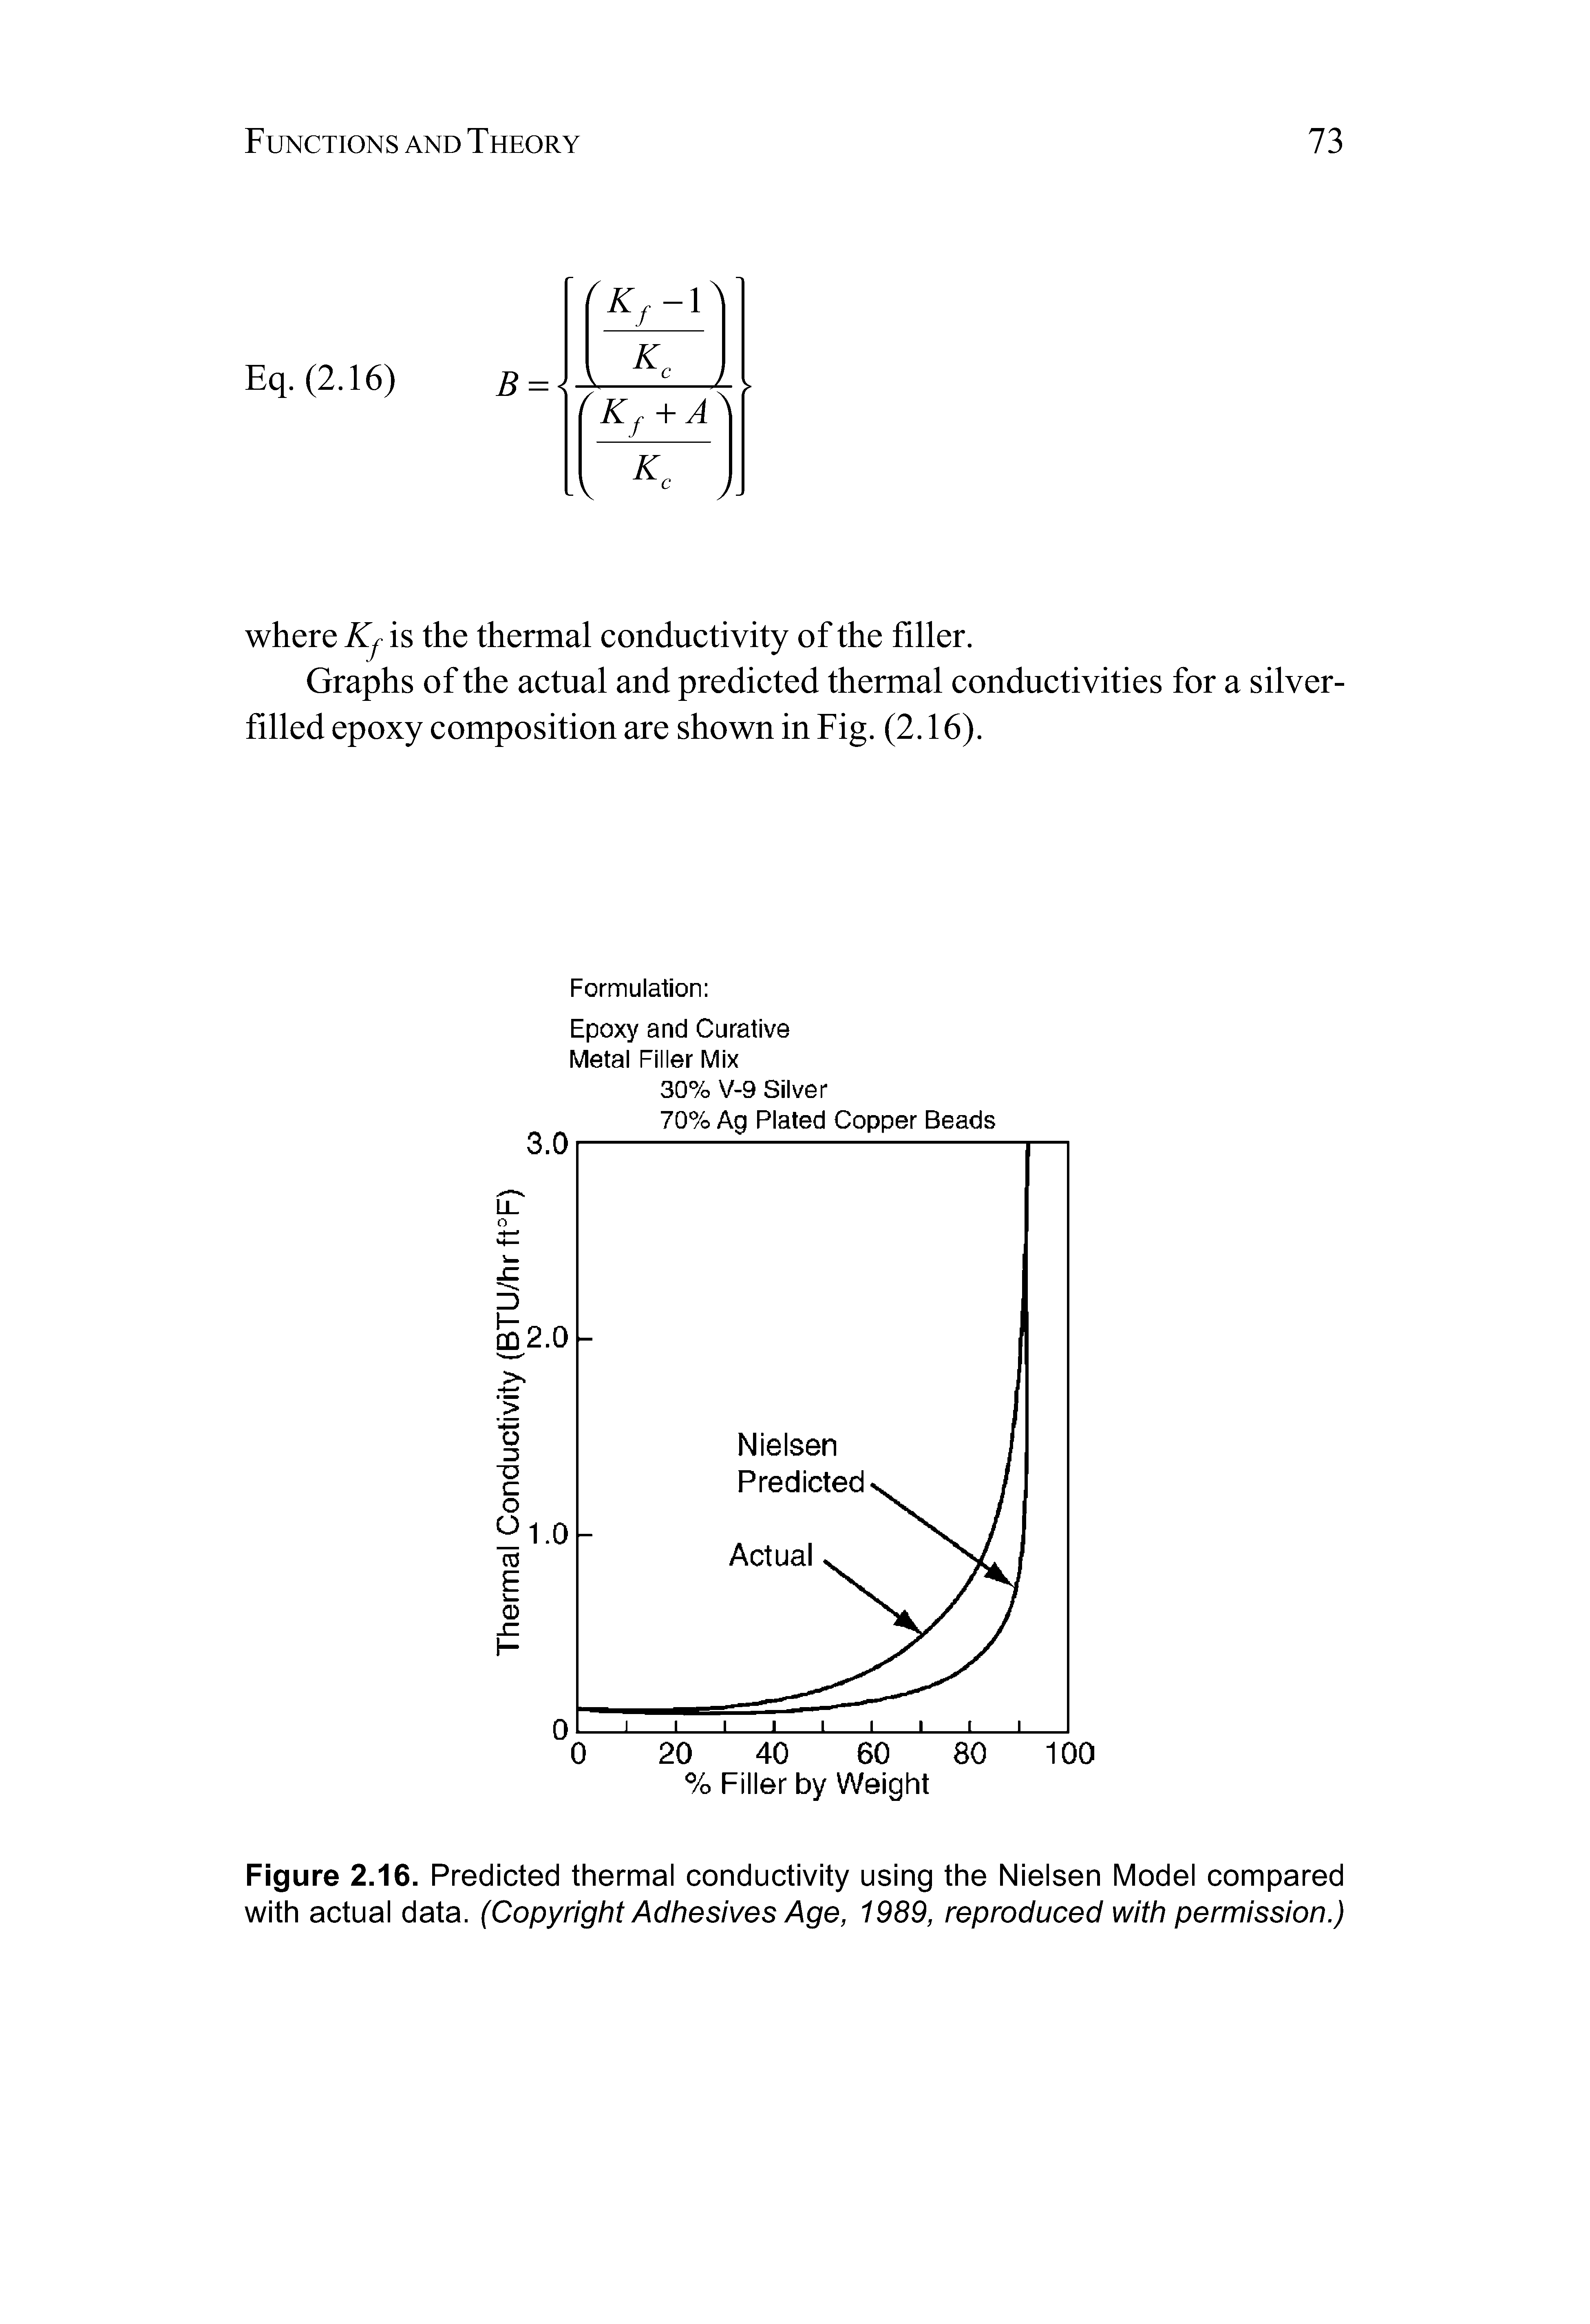 Figure 2.16. Predicted thermal conductivity using the Nielsen Model compared with actual data. (Copyright Adhesives Age, 1989, reproduced with permission.)...